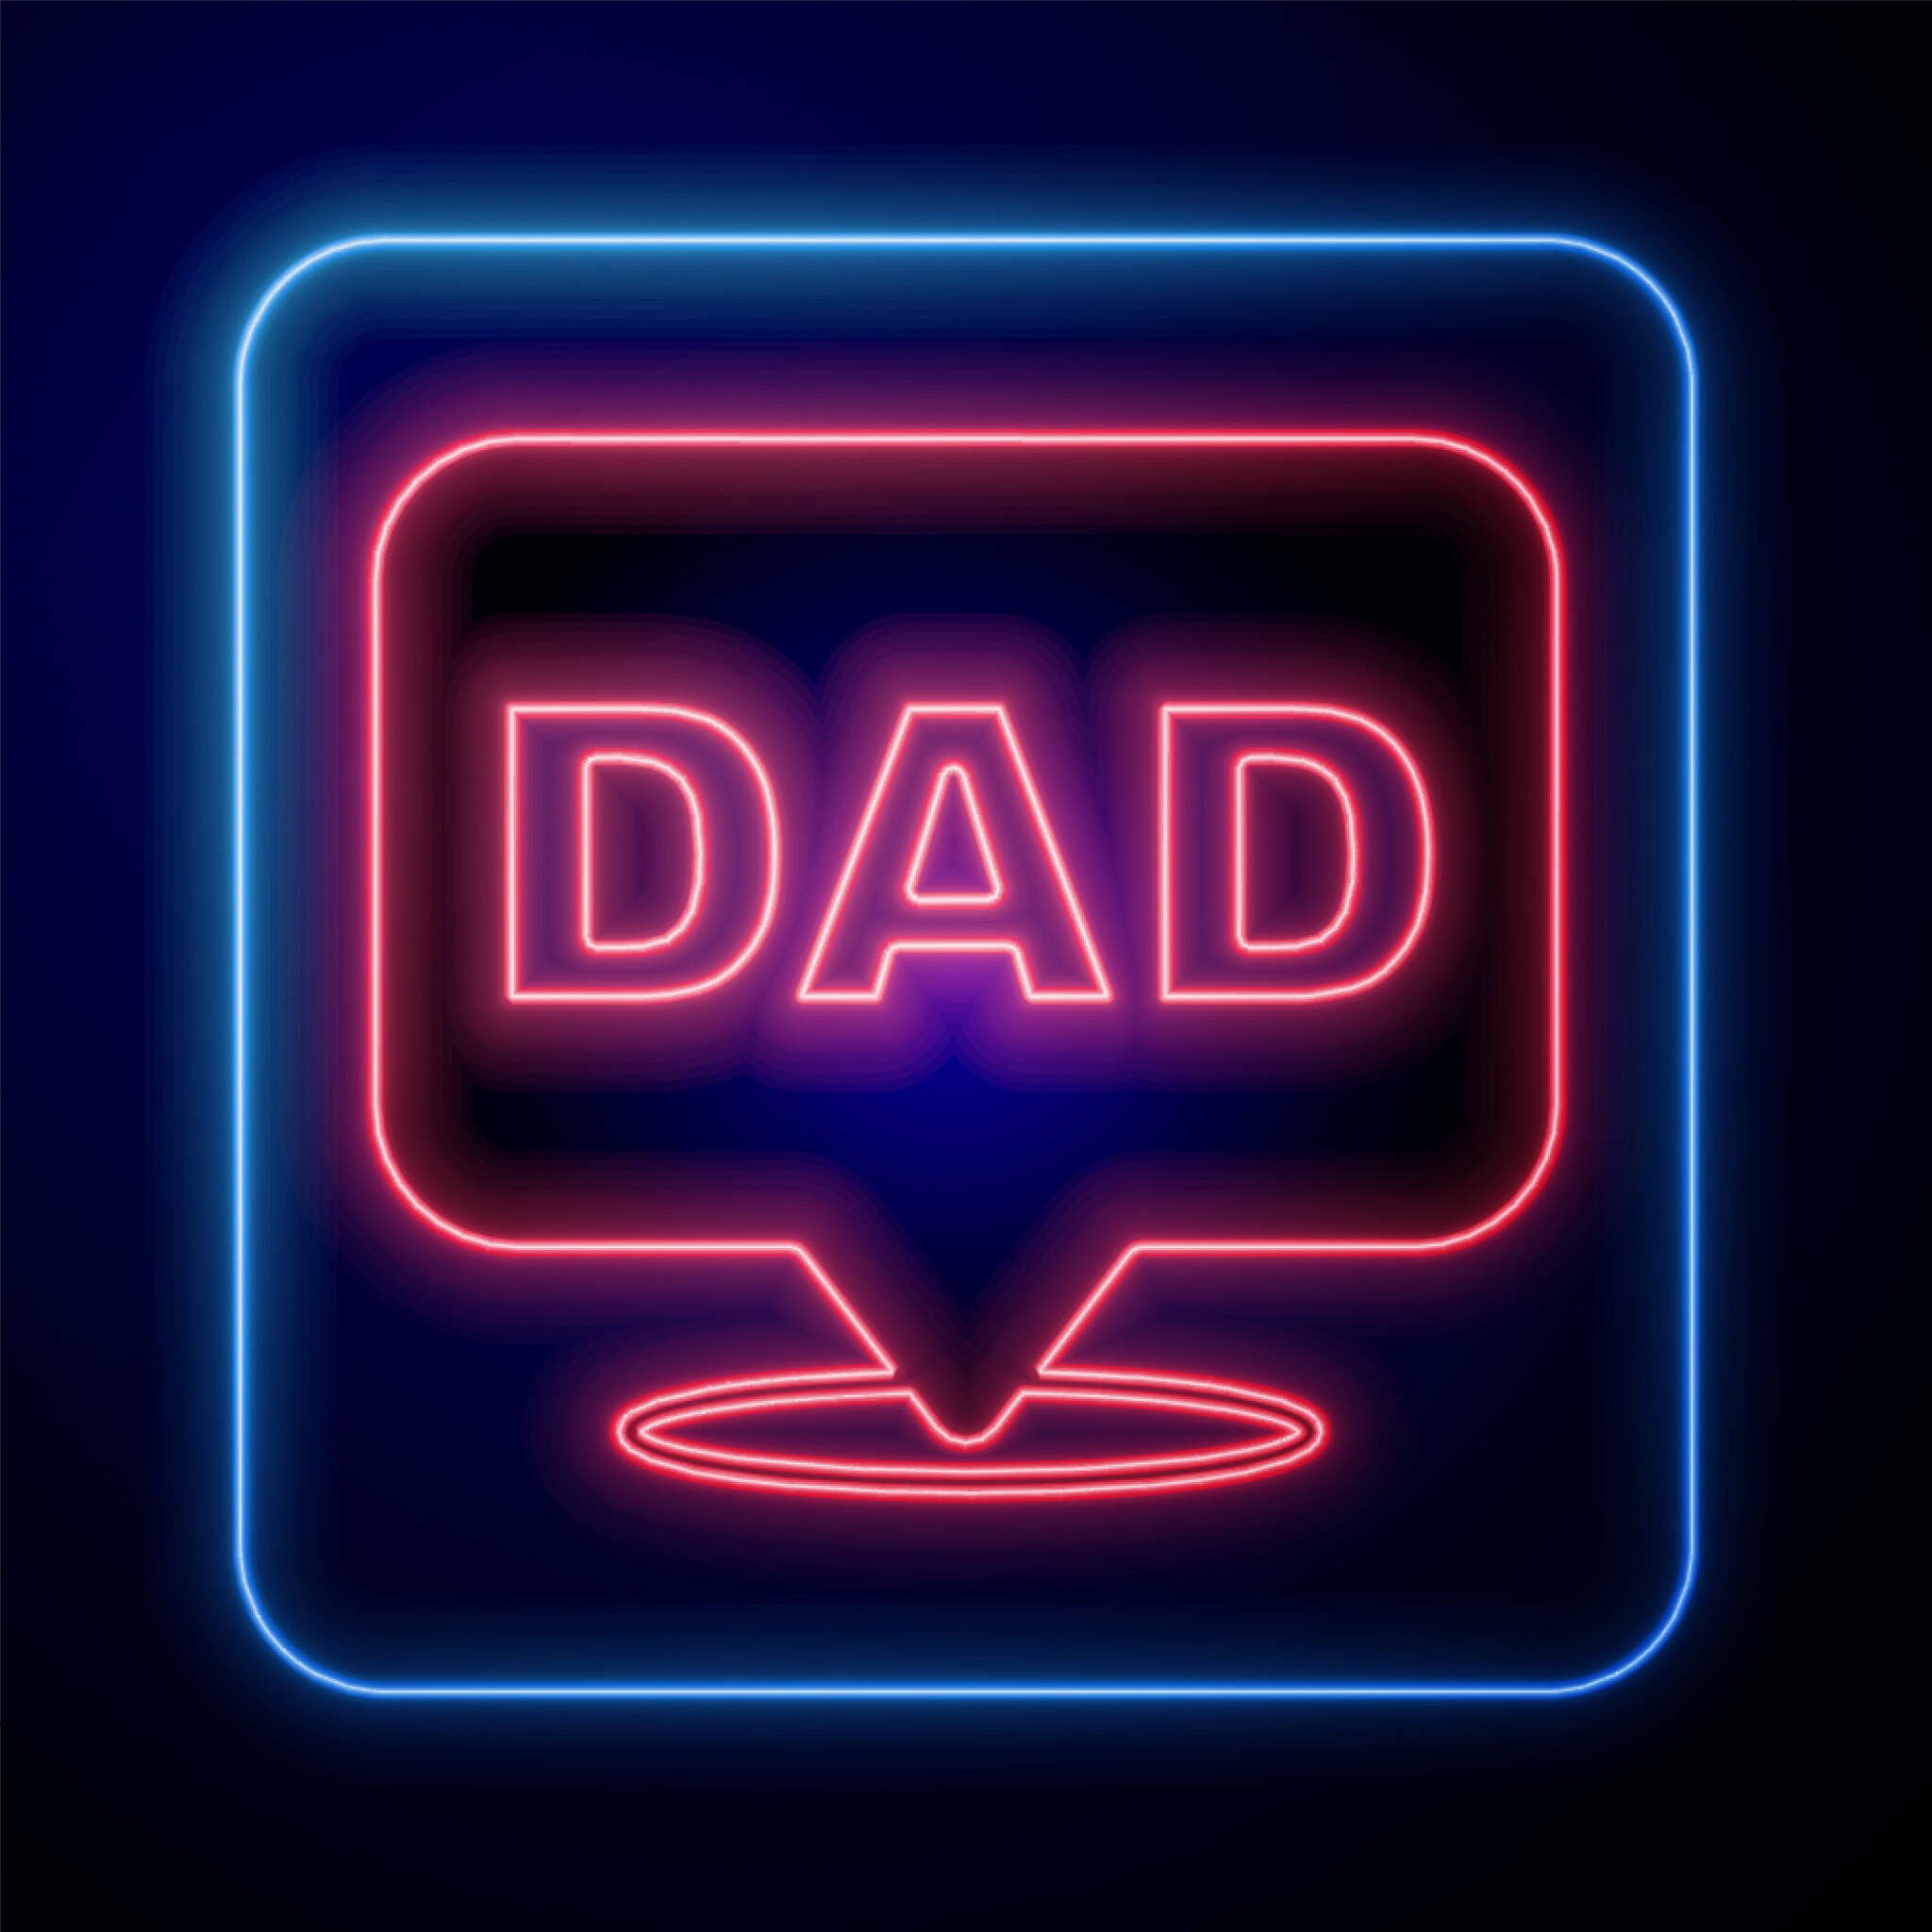 Shop for the Dad with a Ph.D. in Dad Jokes - Perfect Gifts Await!